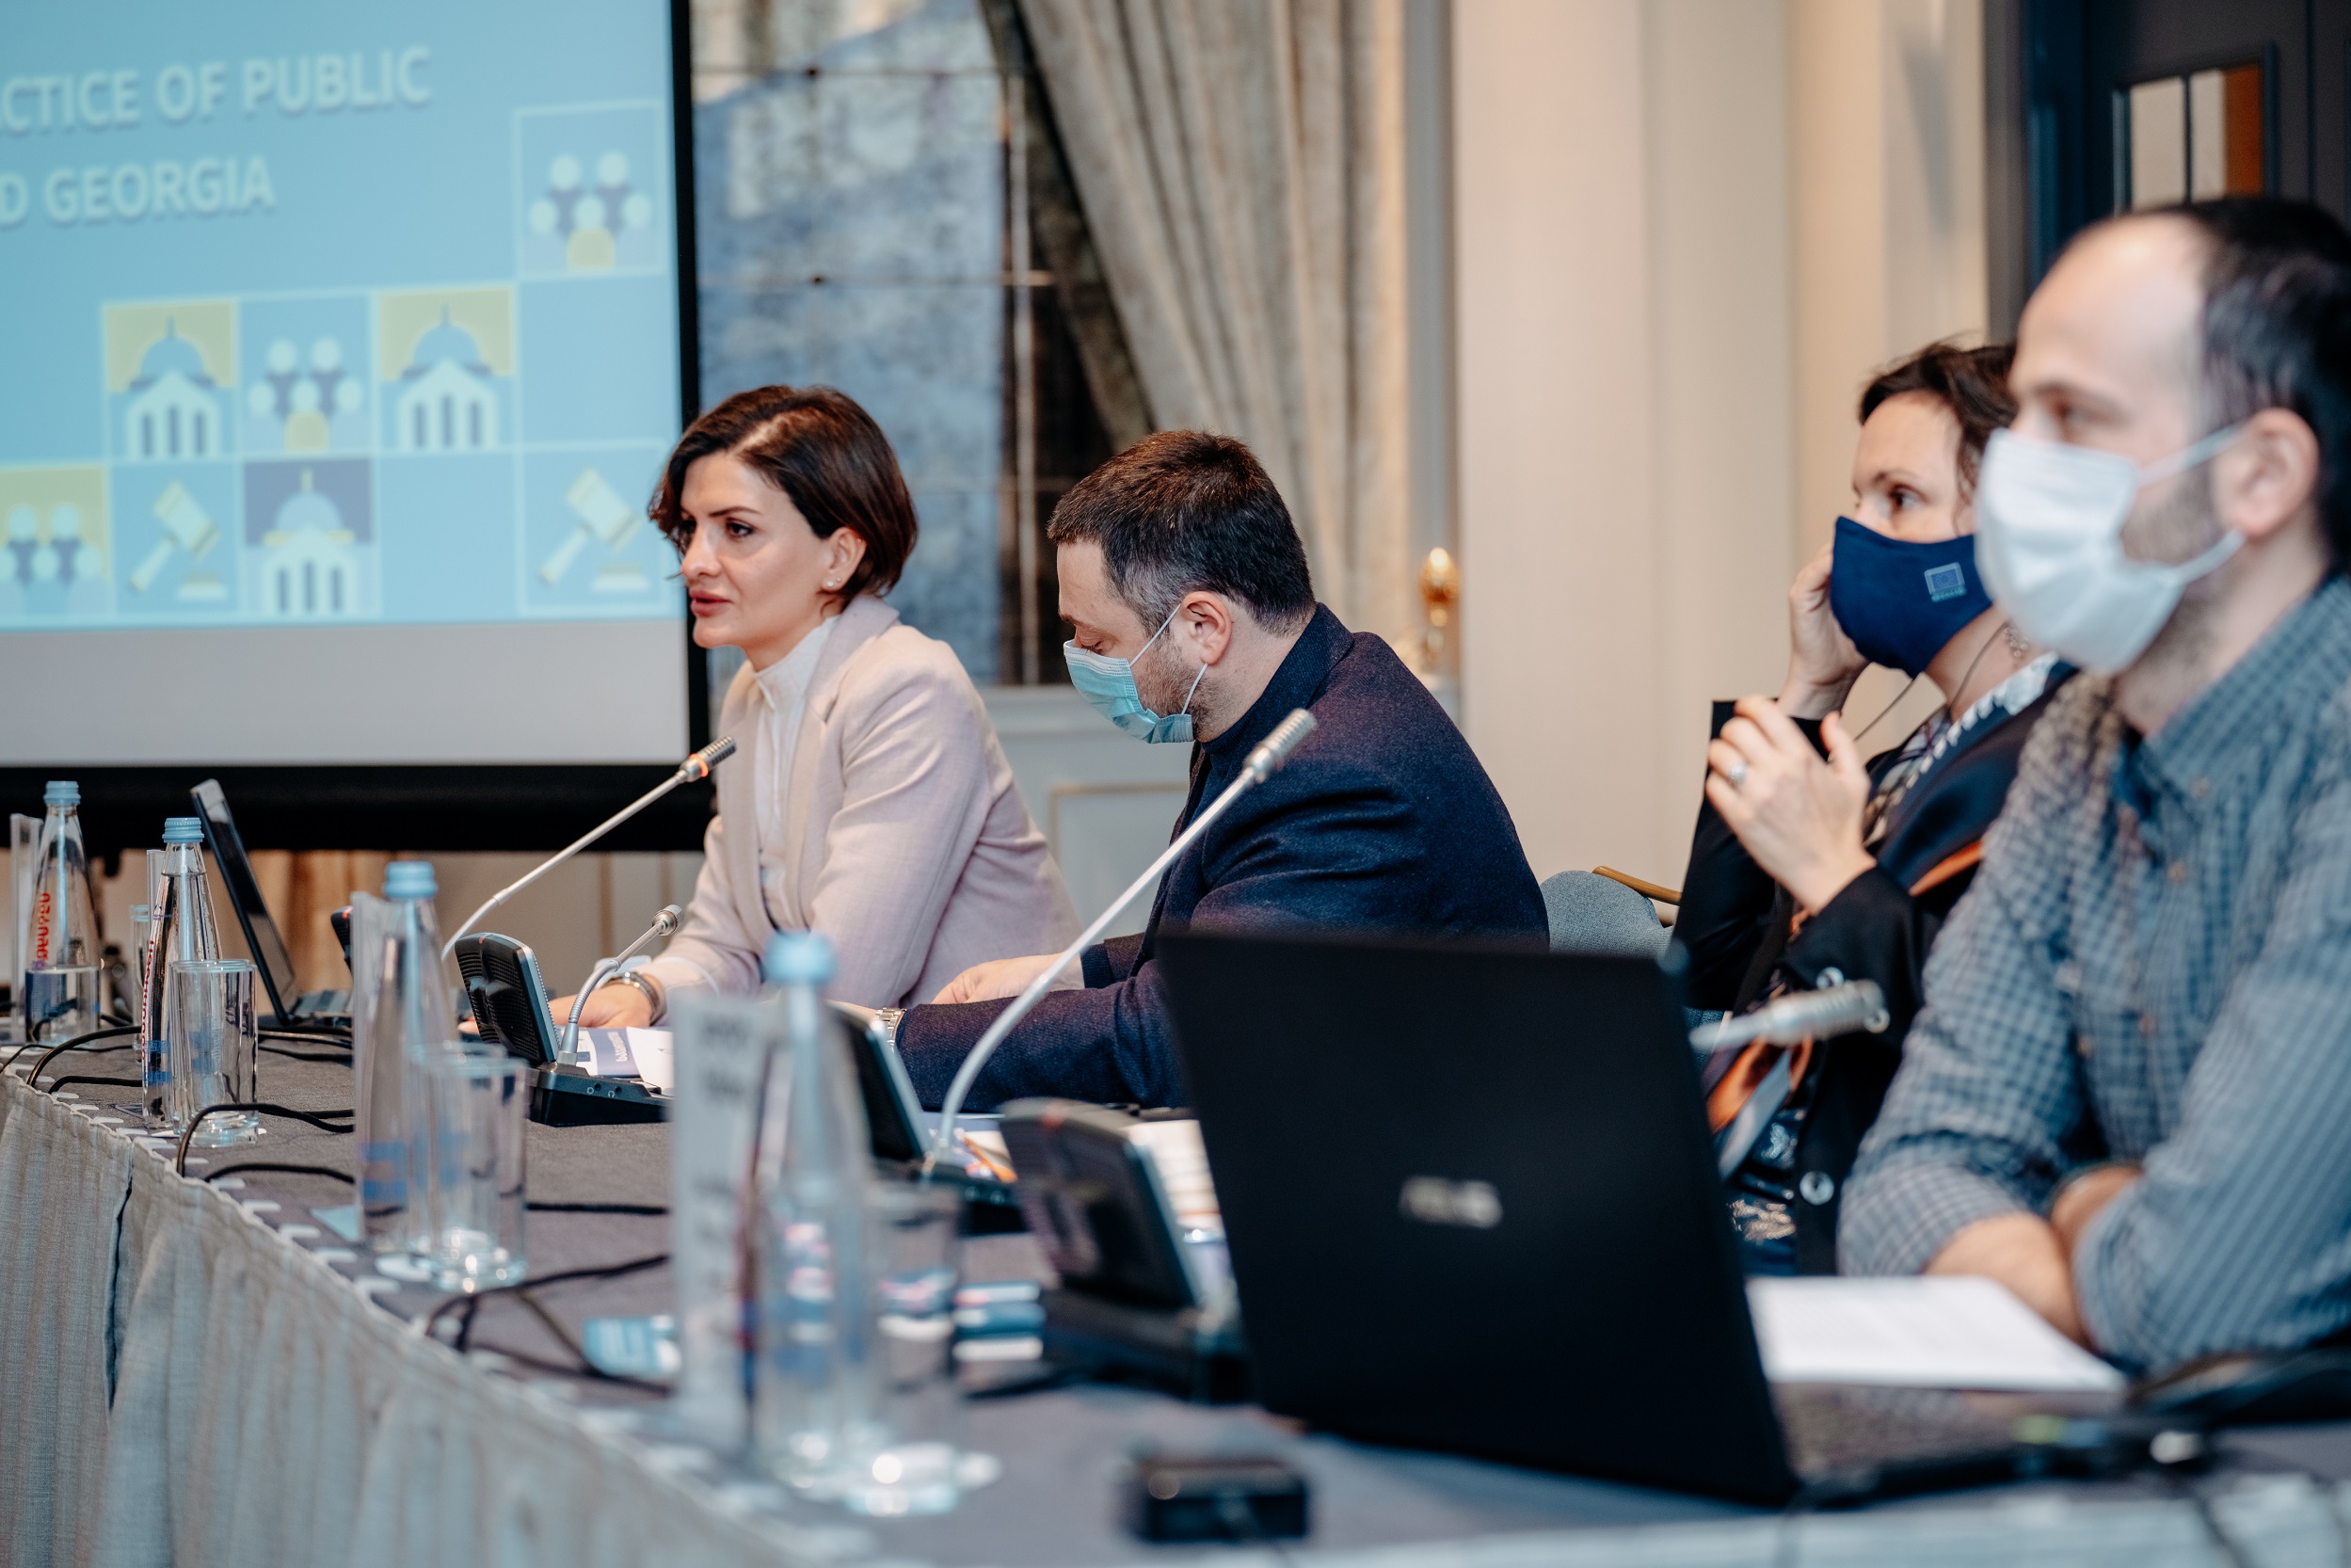 Presentation of the study - Best European practice of public administration and Georgia